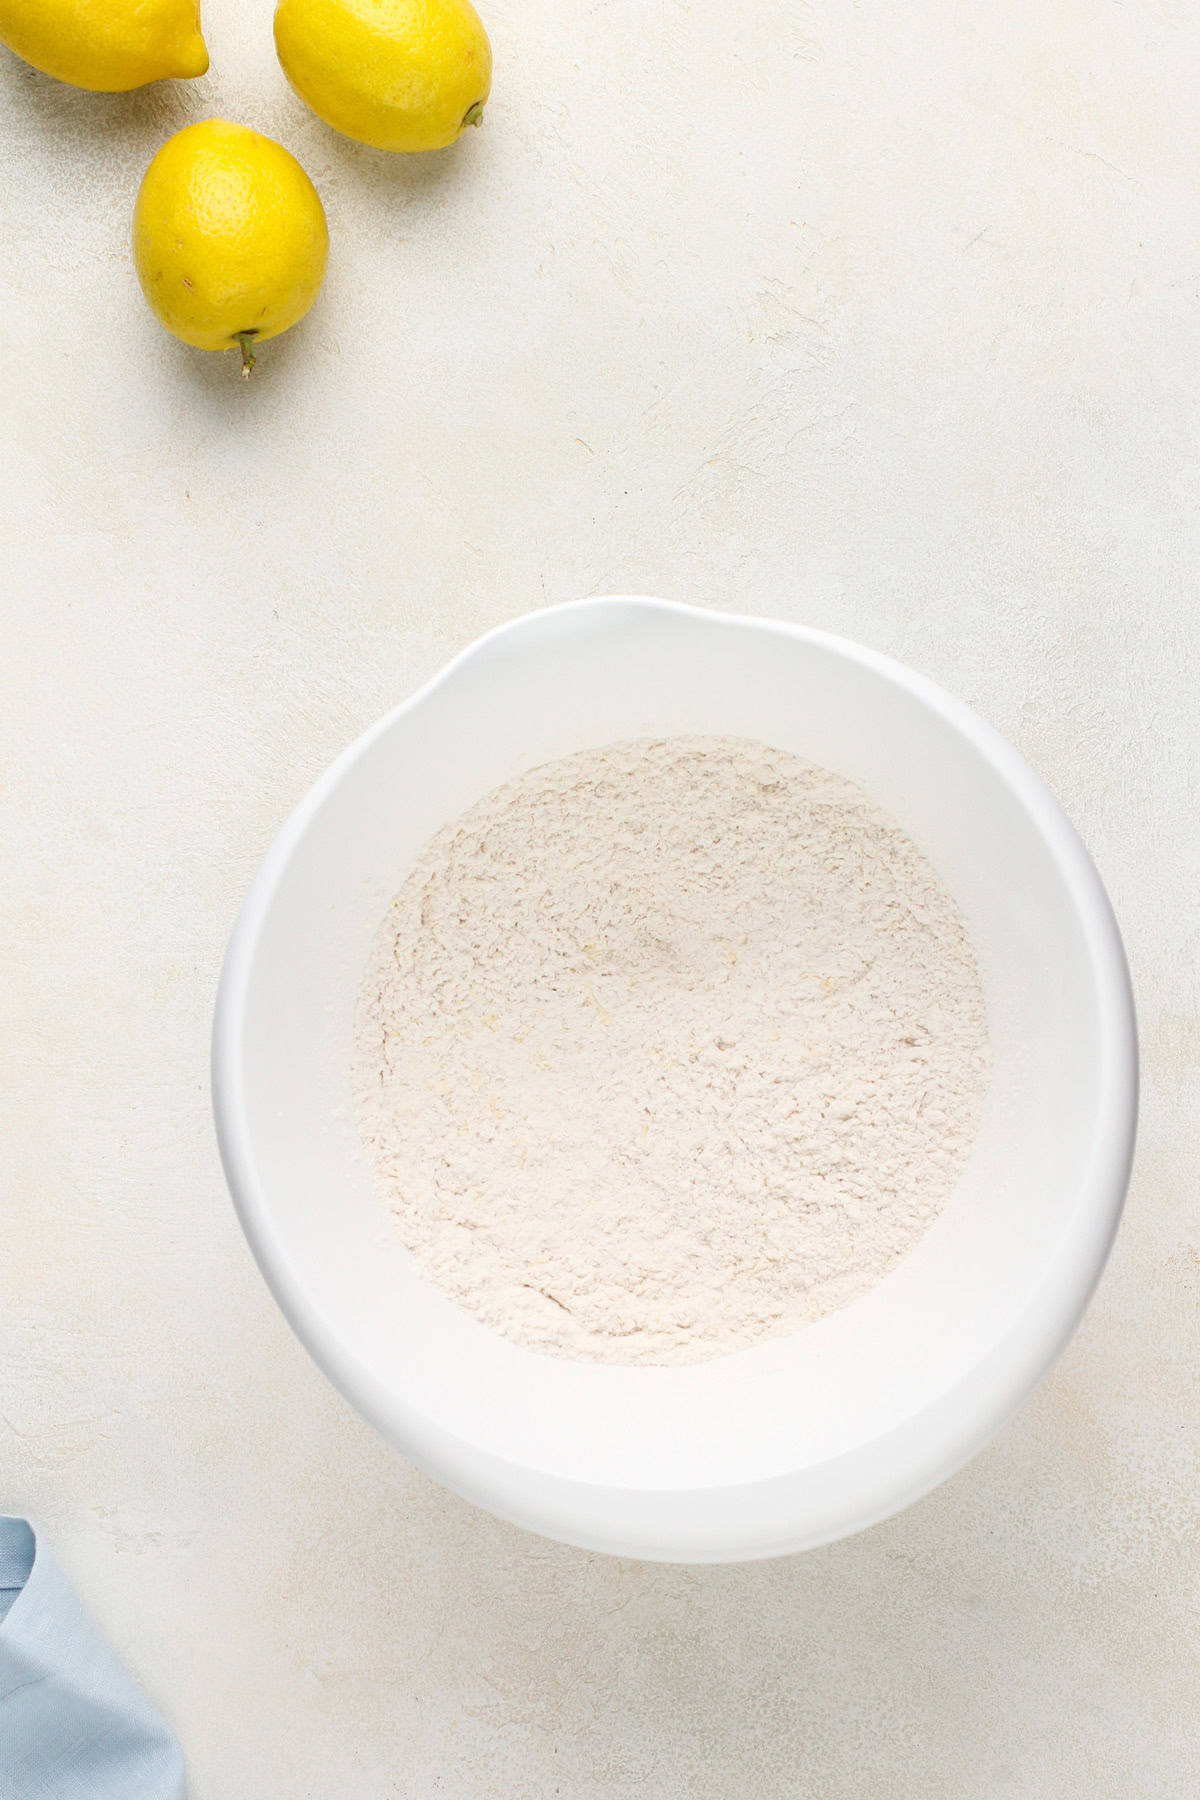 Dry ingredients for lemon scones mixed together in a white bowl.